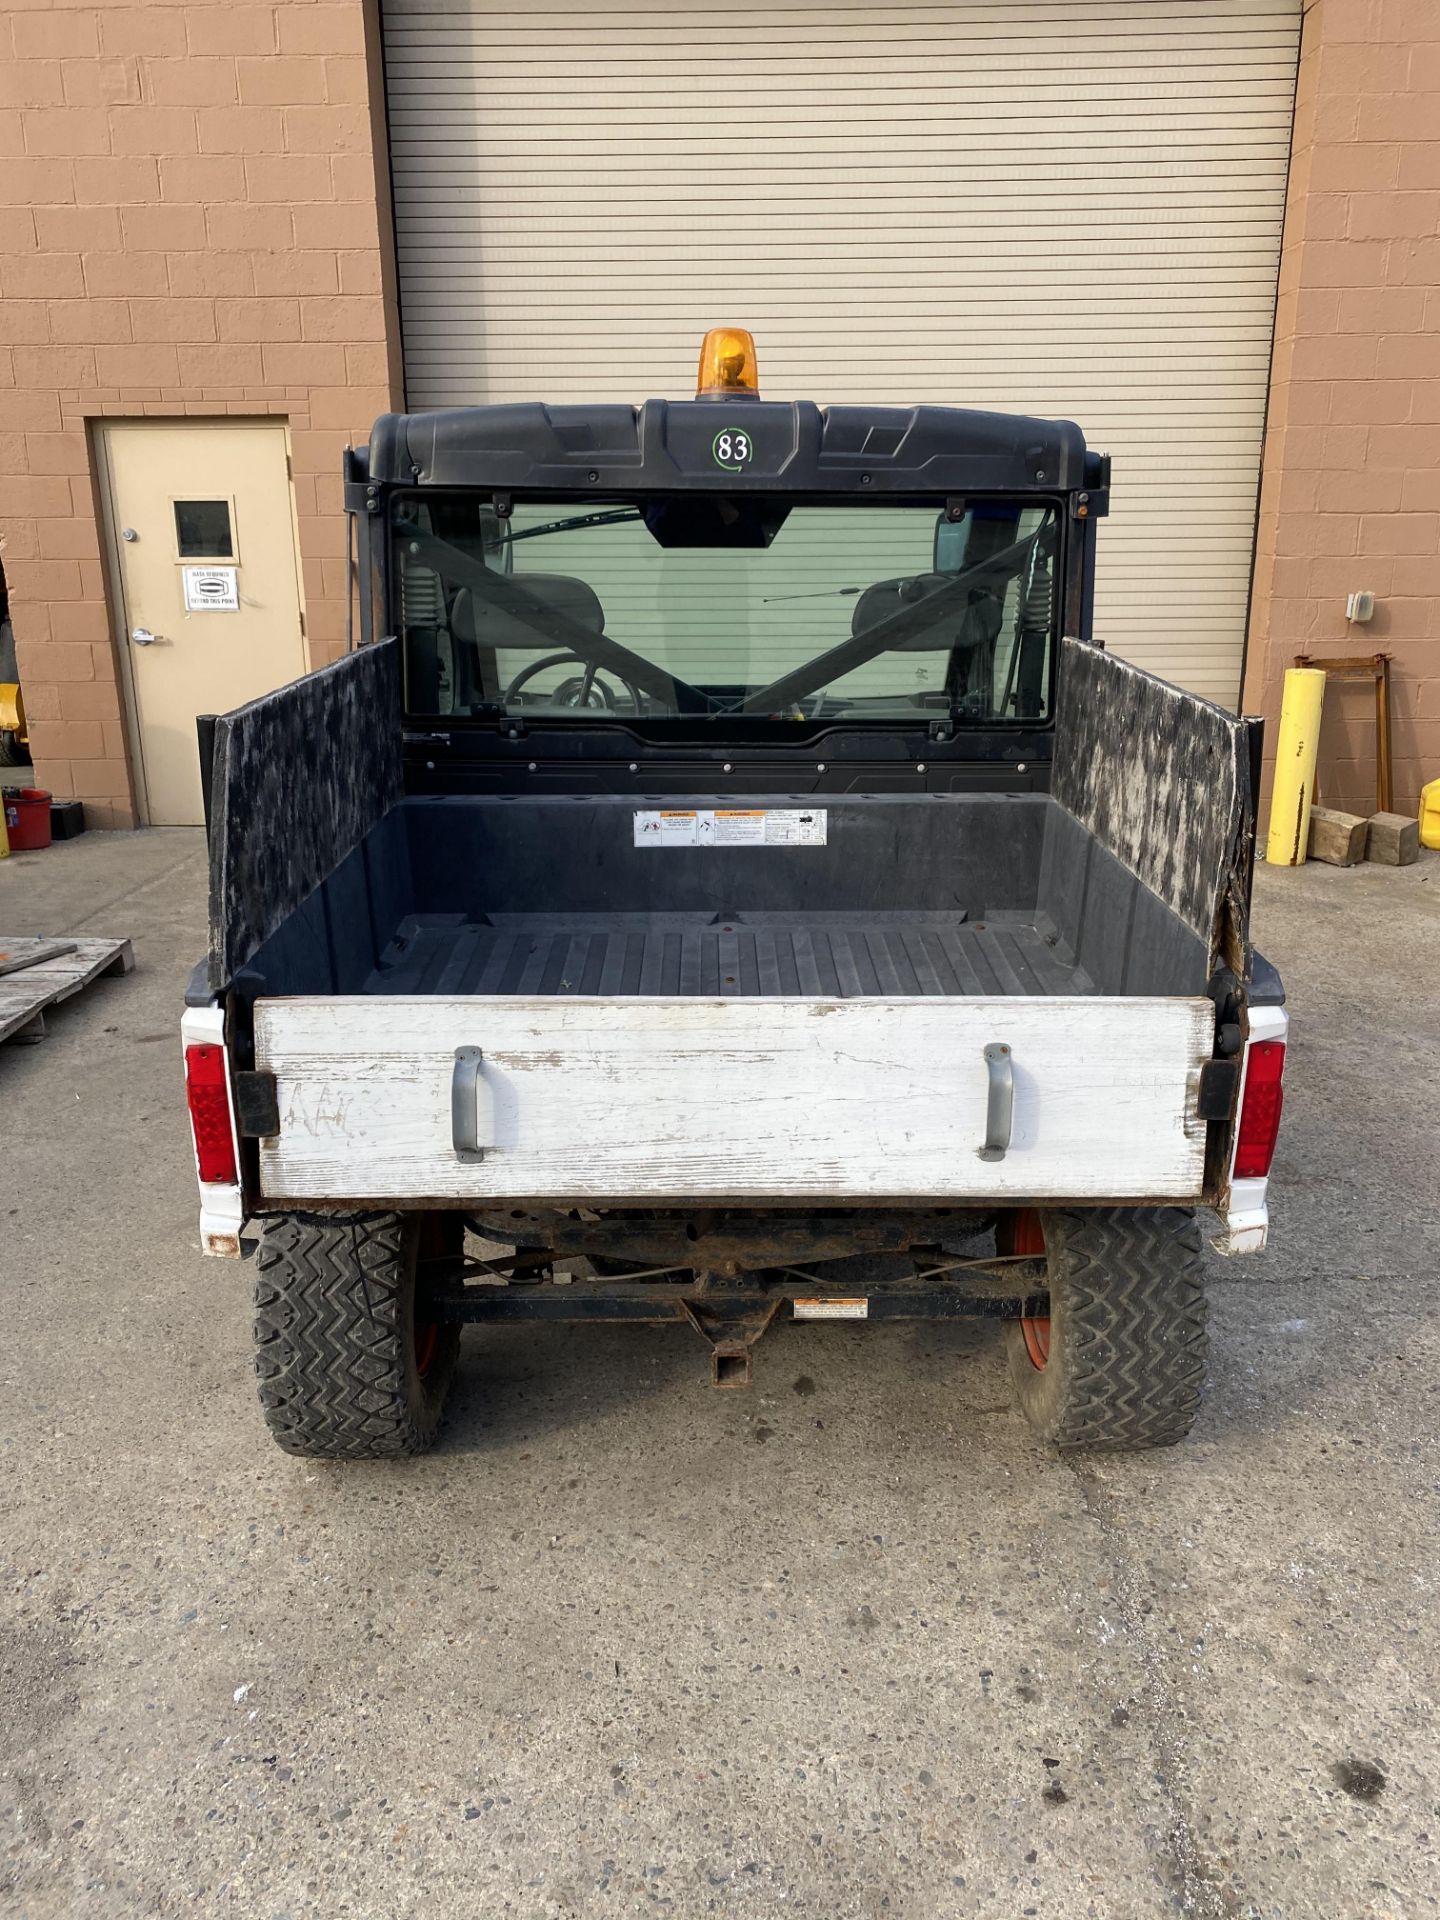 Bobcat 4x4 Utility Vehicle Diesel Enclosed Cab w/ 6' Plow #FMFB69 Dumping Bed, #3650 Hours: 1571 - Image 4 of 7